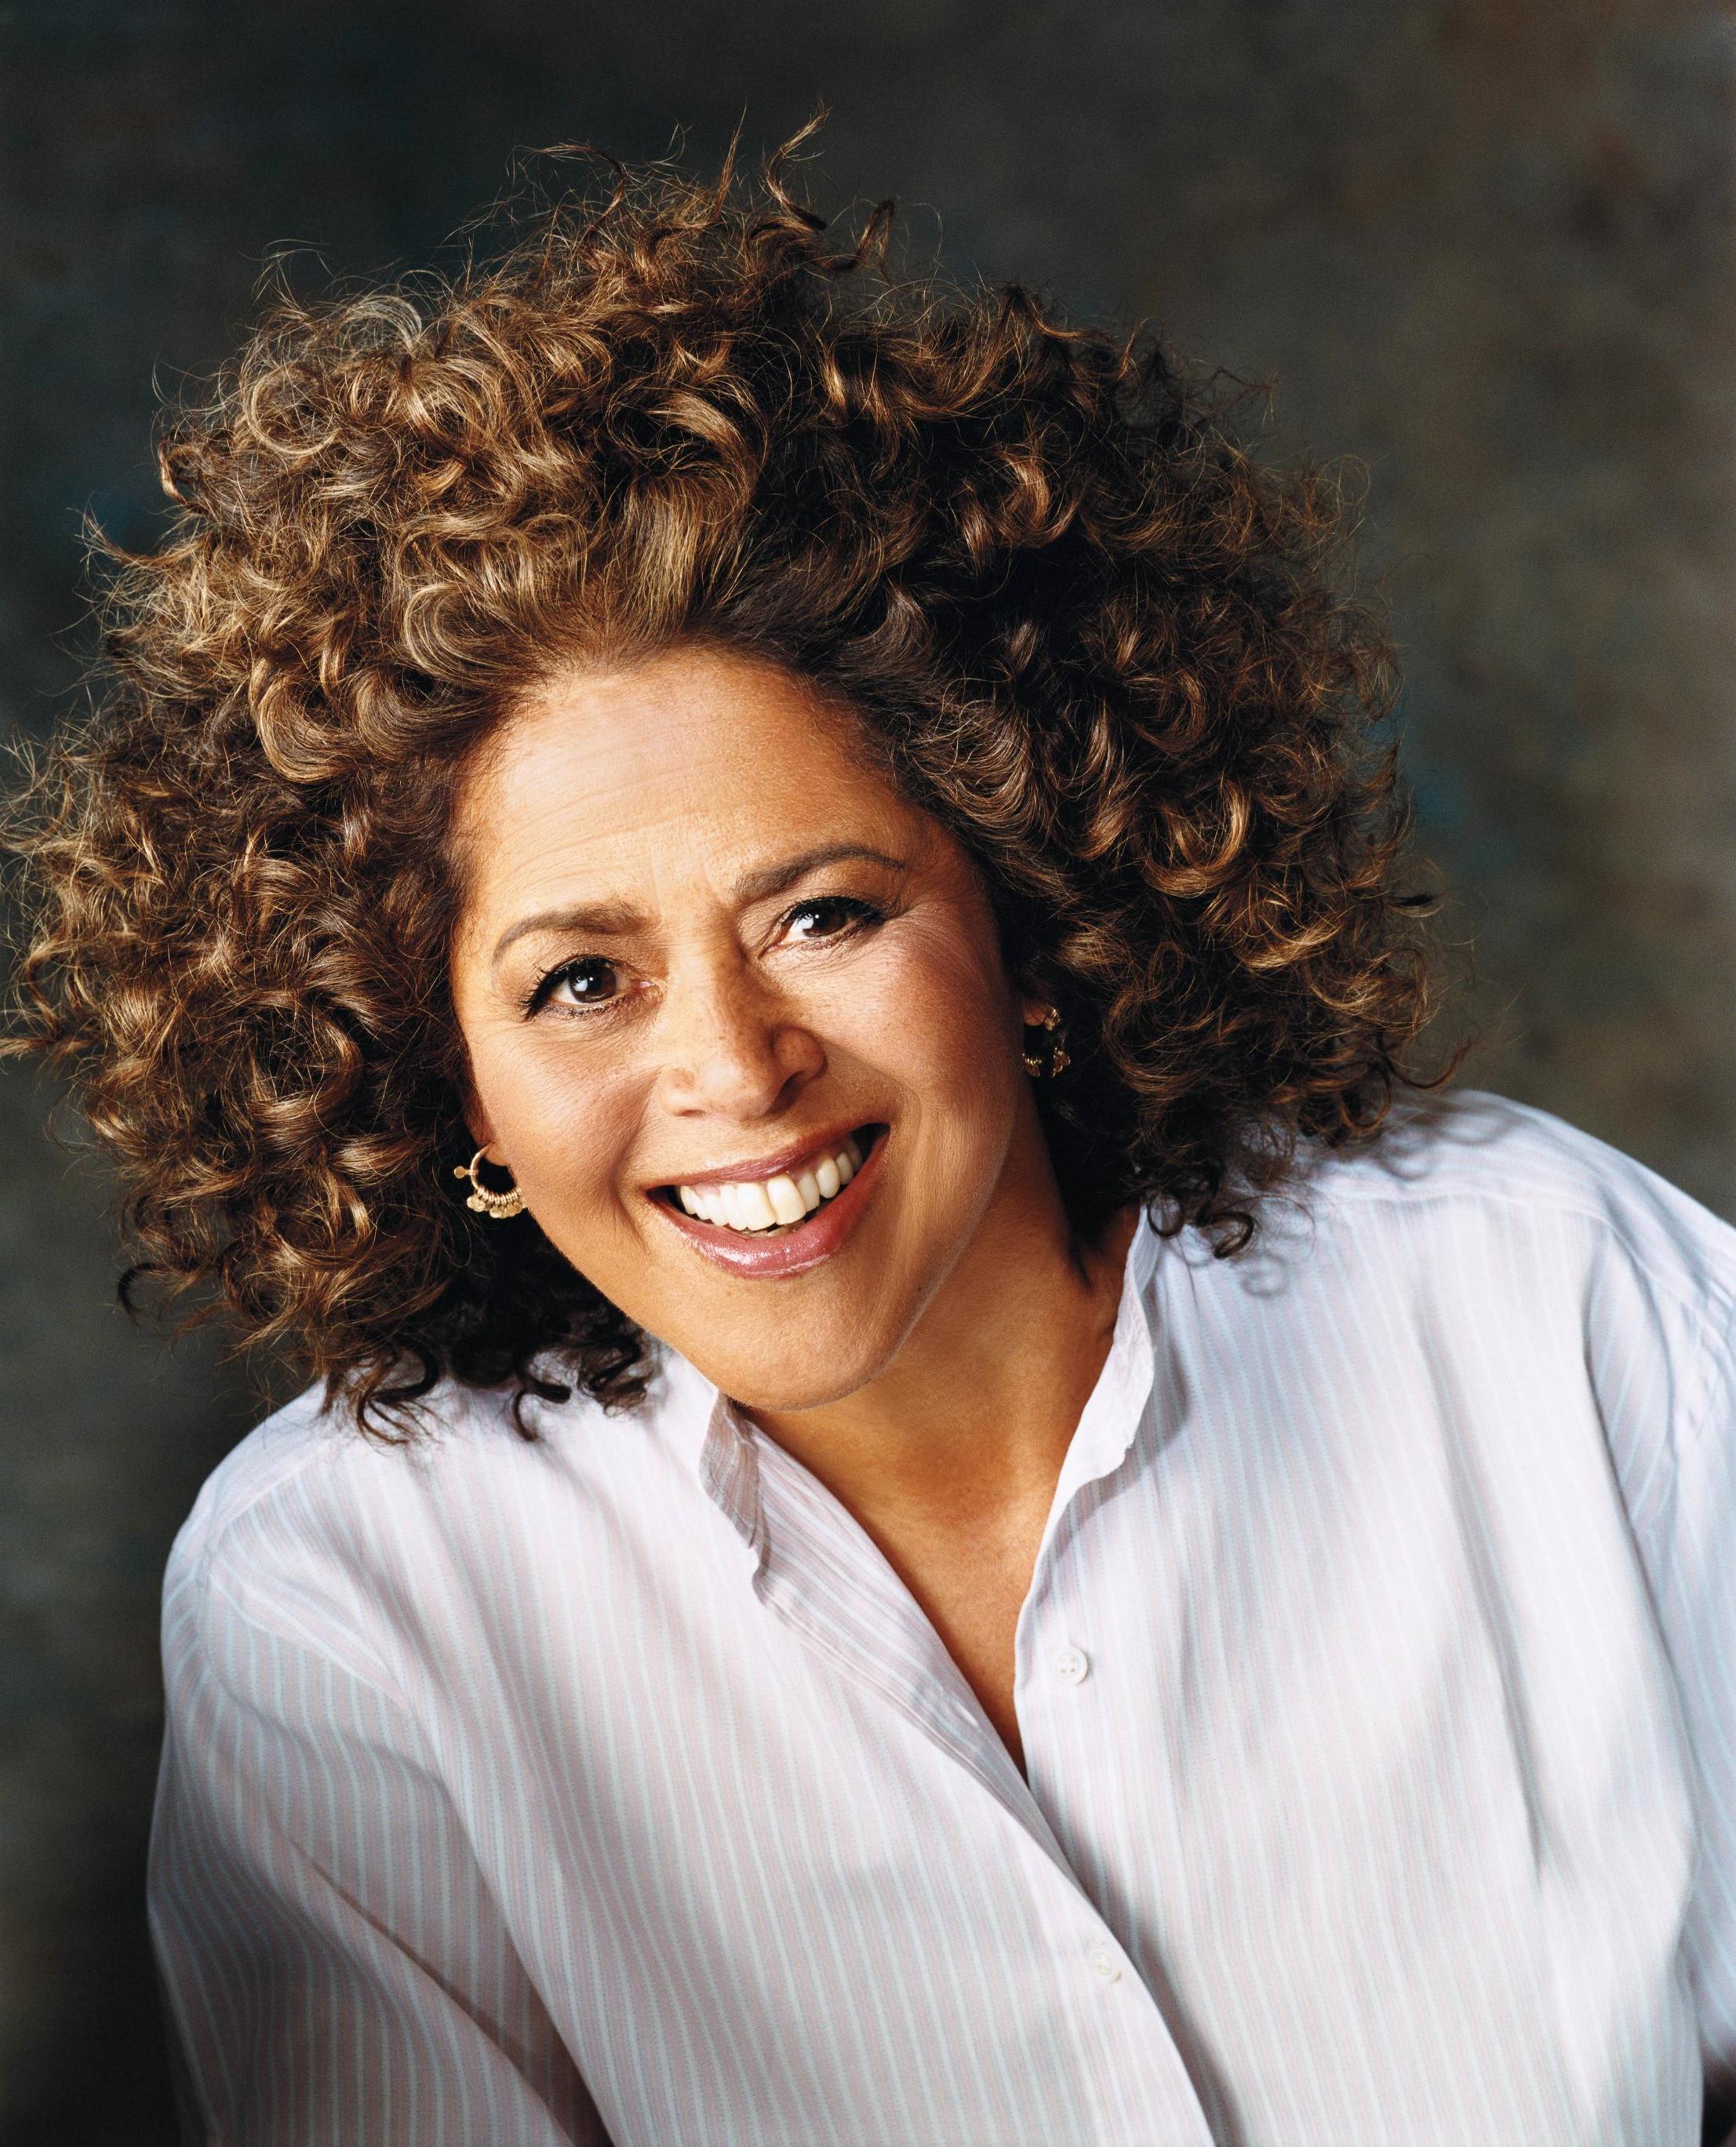 Anna Deavere Smith to deliver 44th Jefferson Lecture in the Humanities 1 Anna Deavere Smith, an actress, playwright, professor, and 2012 National Humanities Medal winner, will deliver the 2015 Jefferson Lecture in the Humanities. Sponsored by the National Endowment for the Humanities (NEH), the lecture is among the highest honors the federal government bestows for distinguished intellectual achievement in the humanities. The lecture, which is free and open to the public, also exemplifies the values in the agency’s founding 1965 legislation, which noted that the “humanities belong to all the people of the United States.”